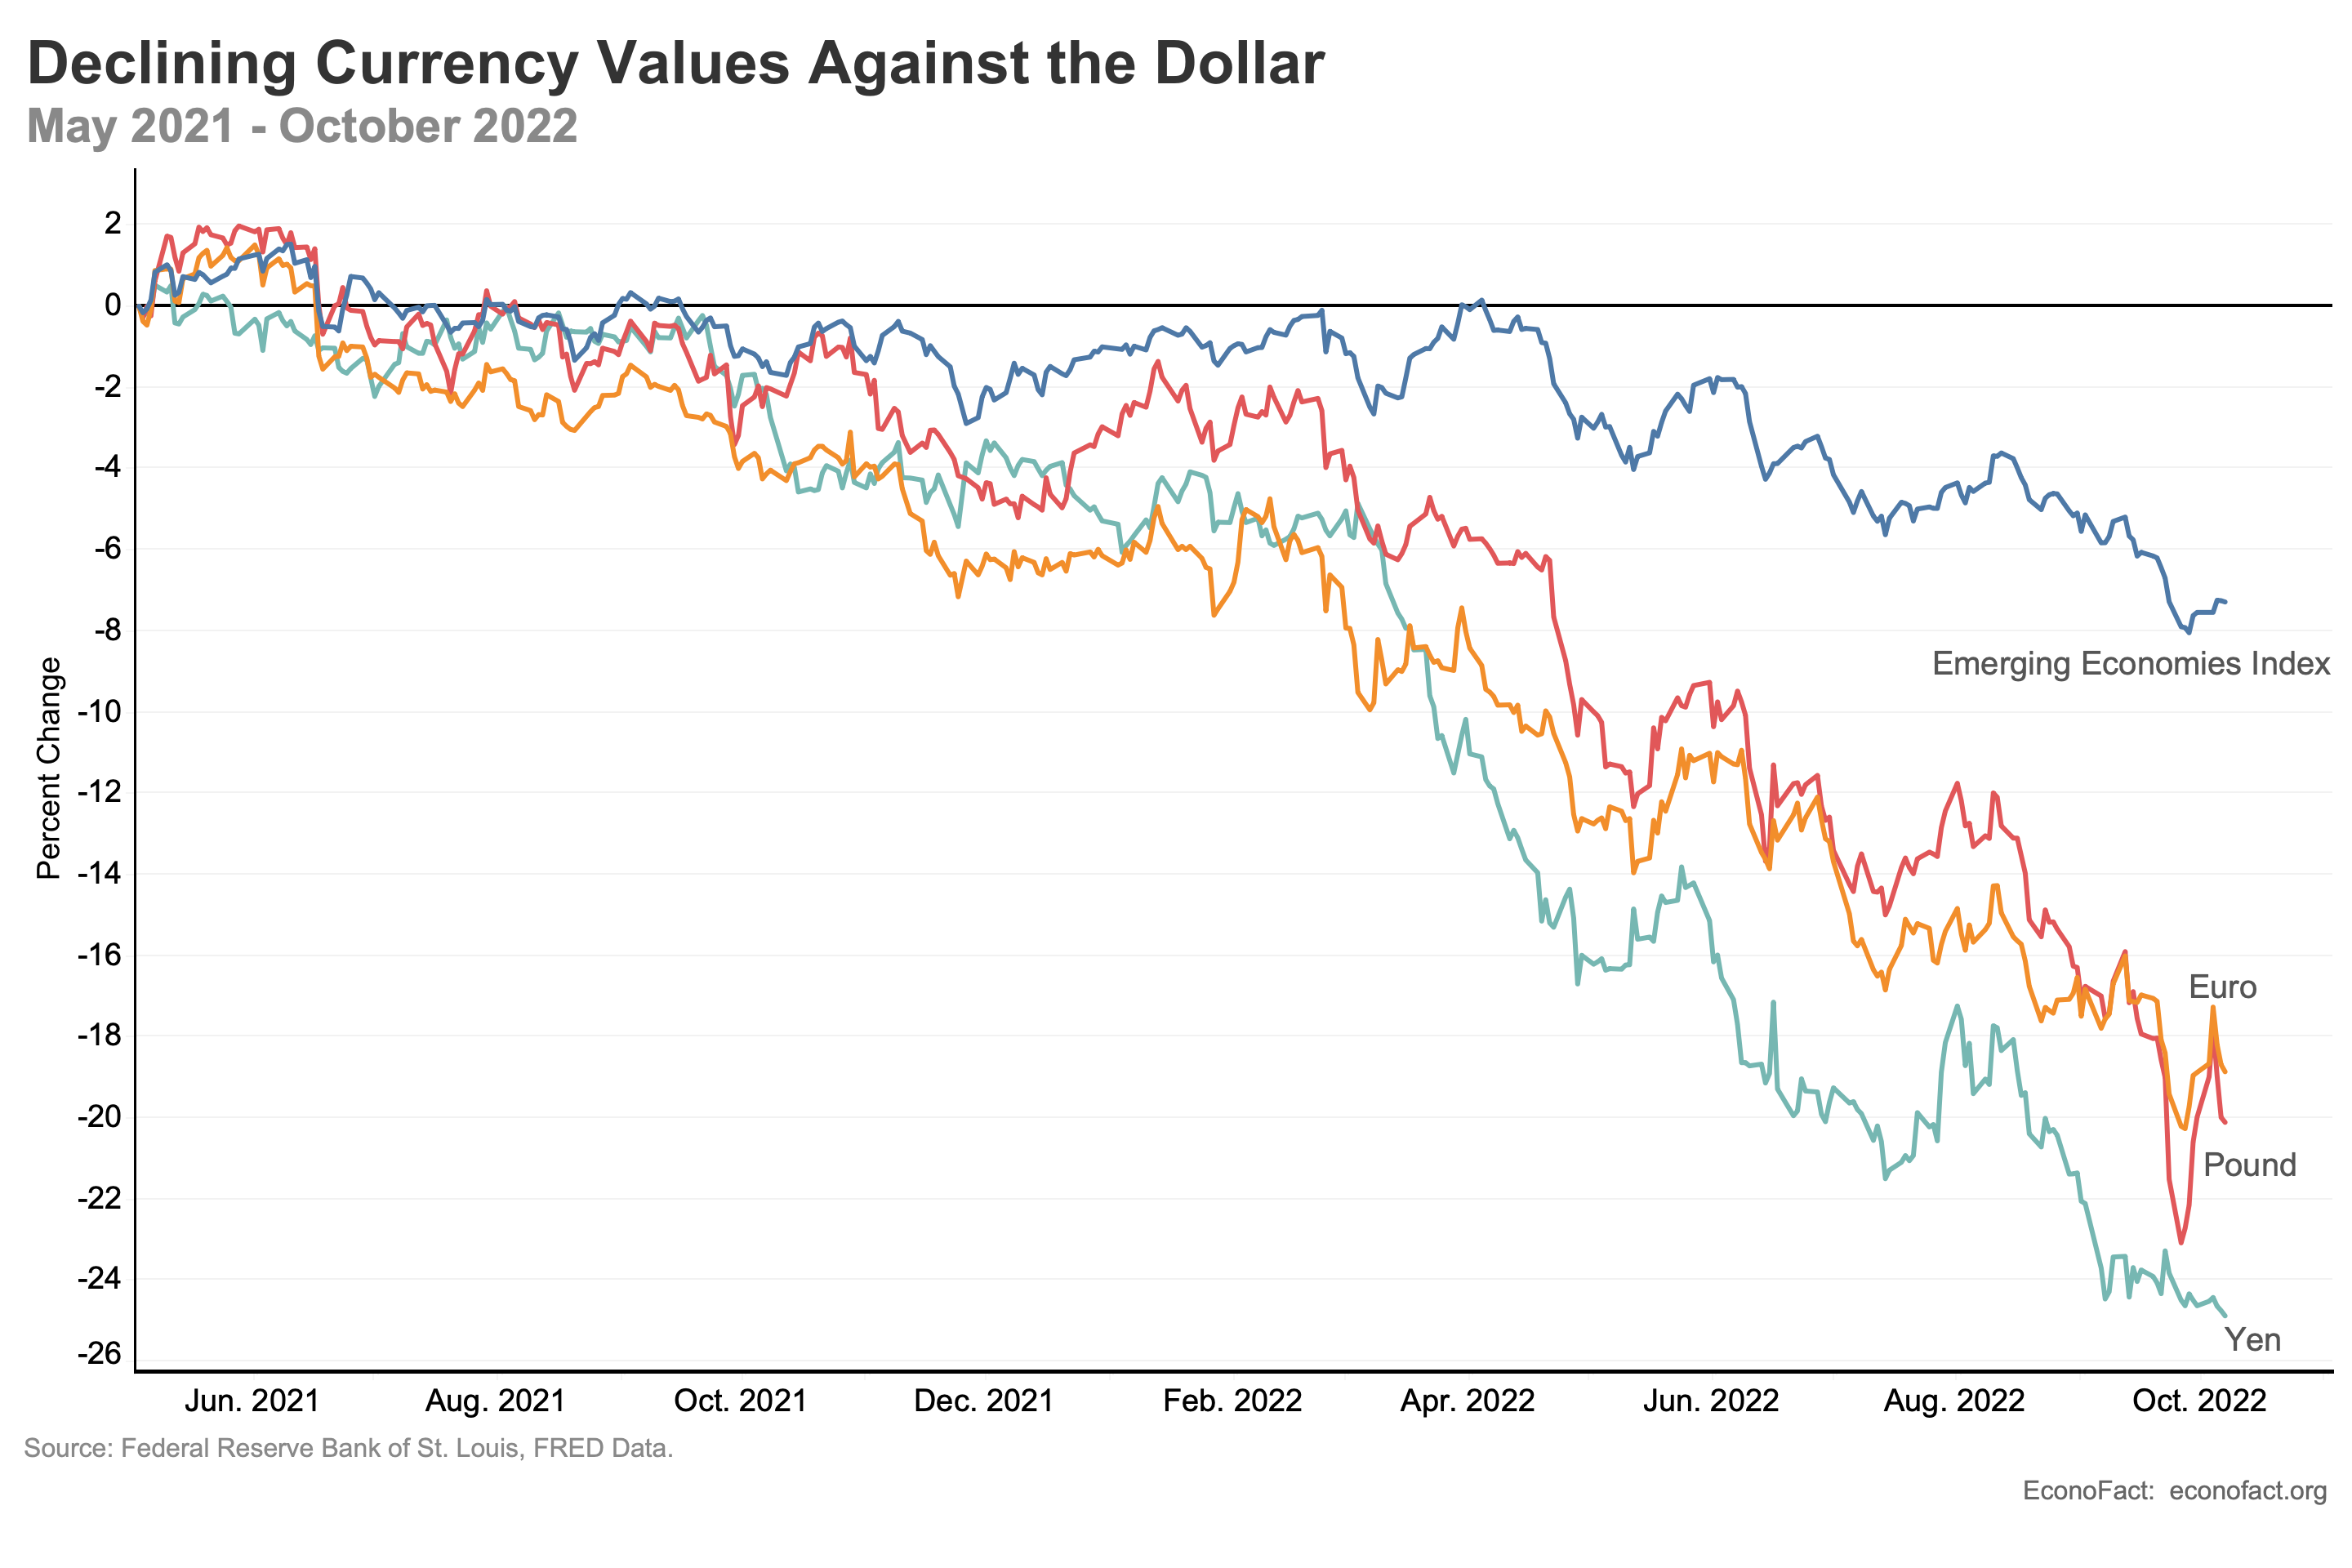 Global Repercussions of the Strong Dollar